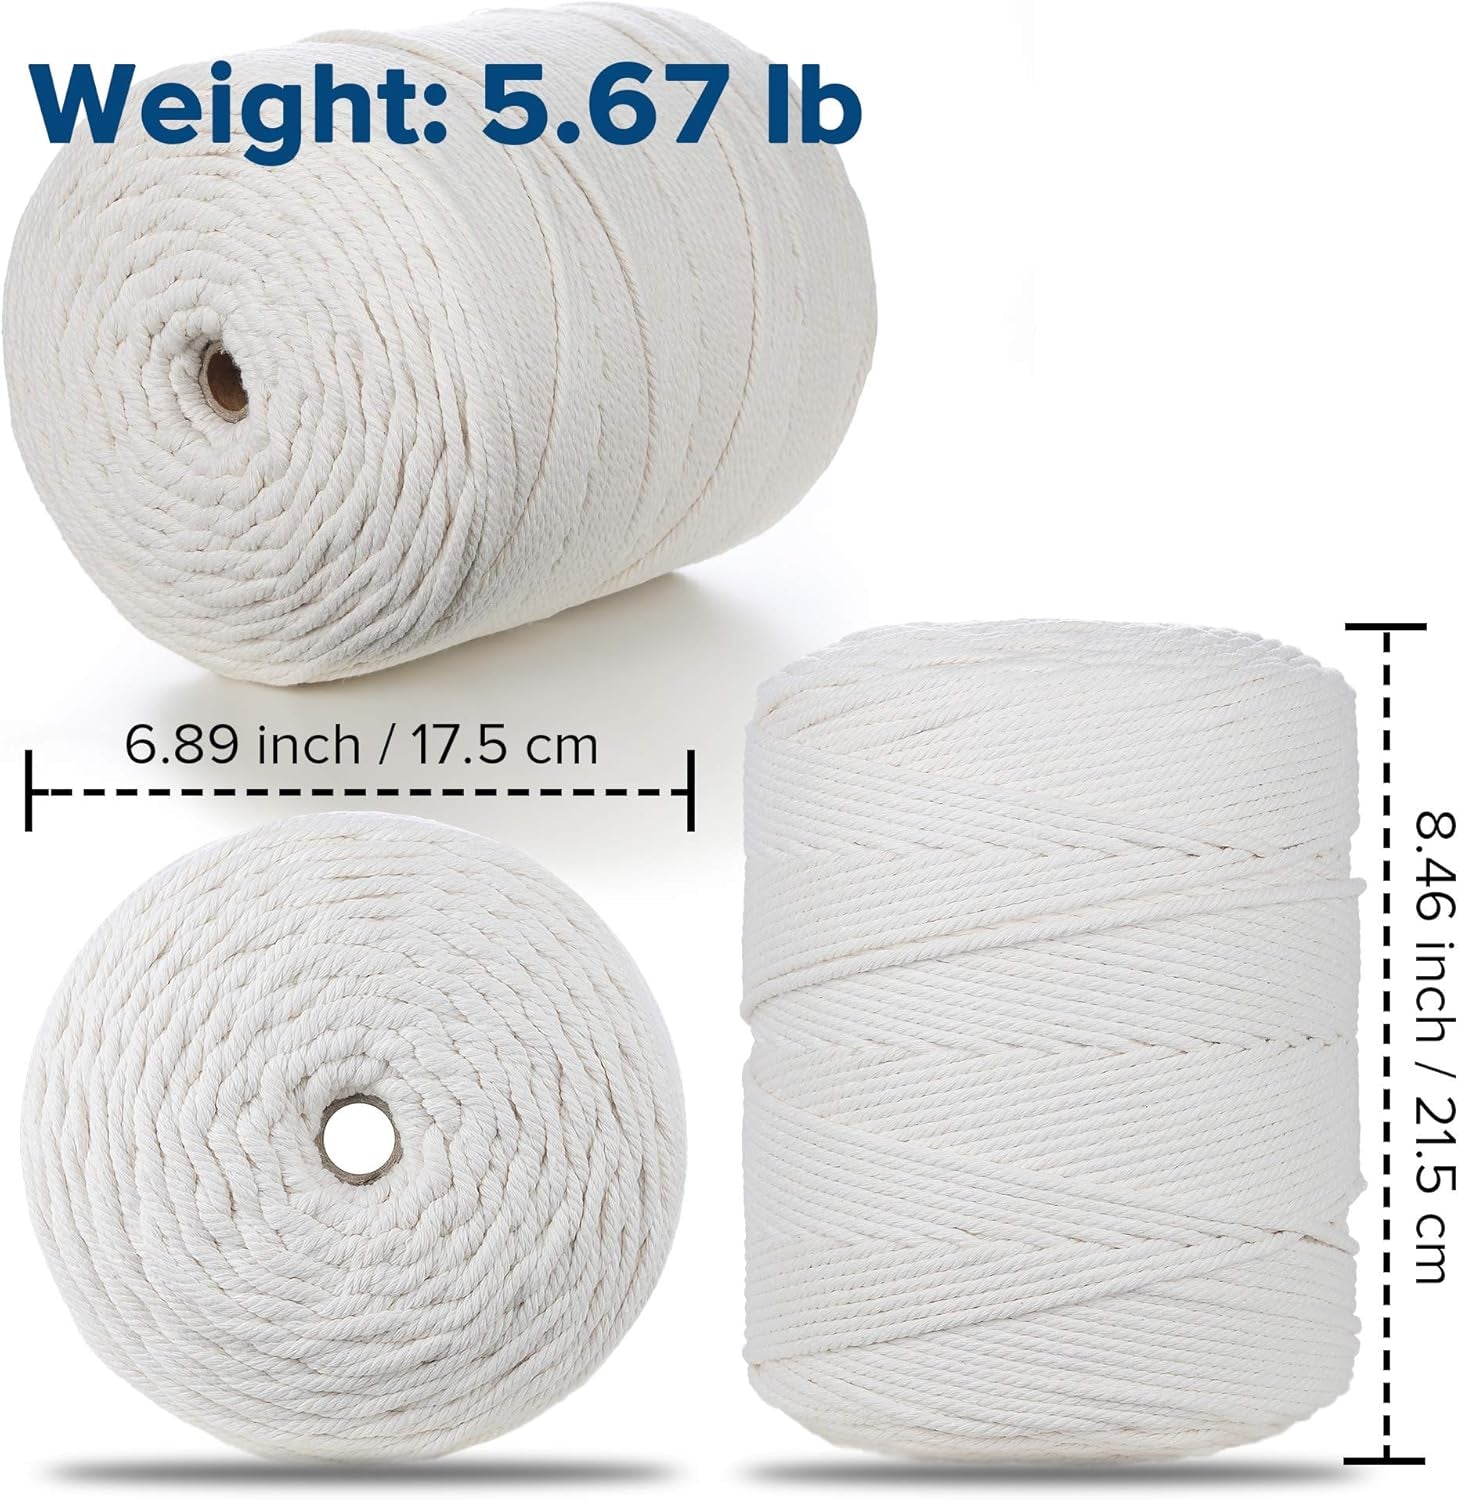 Macrame Cord, 4Mm X 547Yards, 100% Natural Cotton, 4 Strand Twisted Soft Cord for Crafting, Decorations and DIY Projects